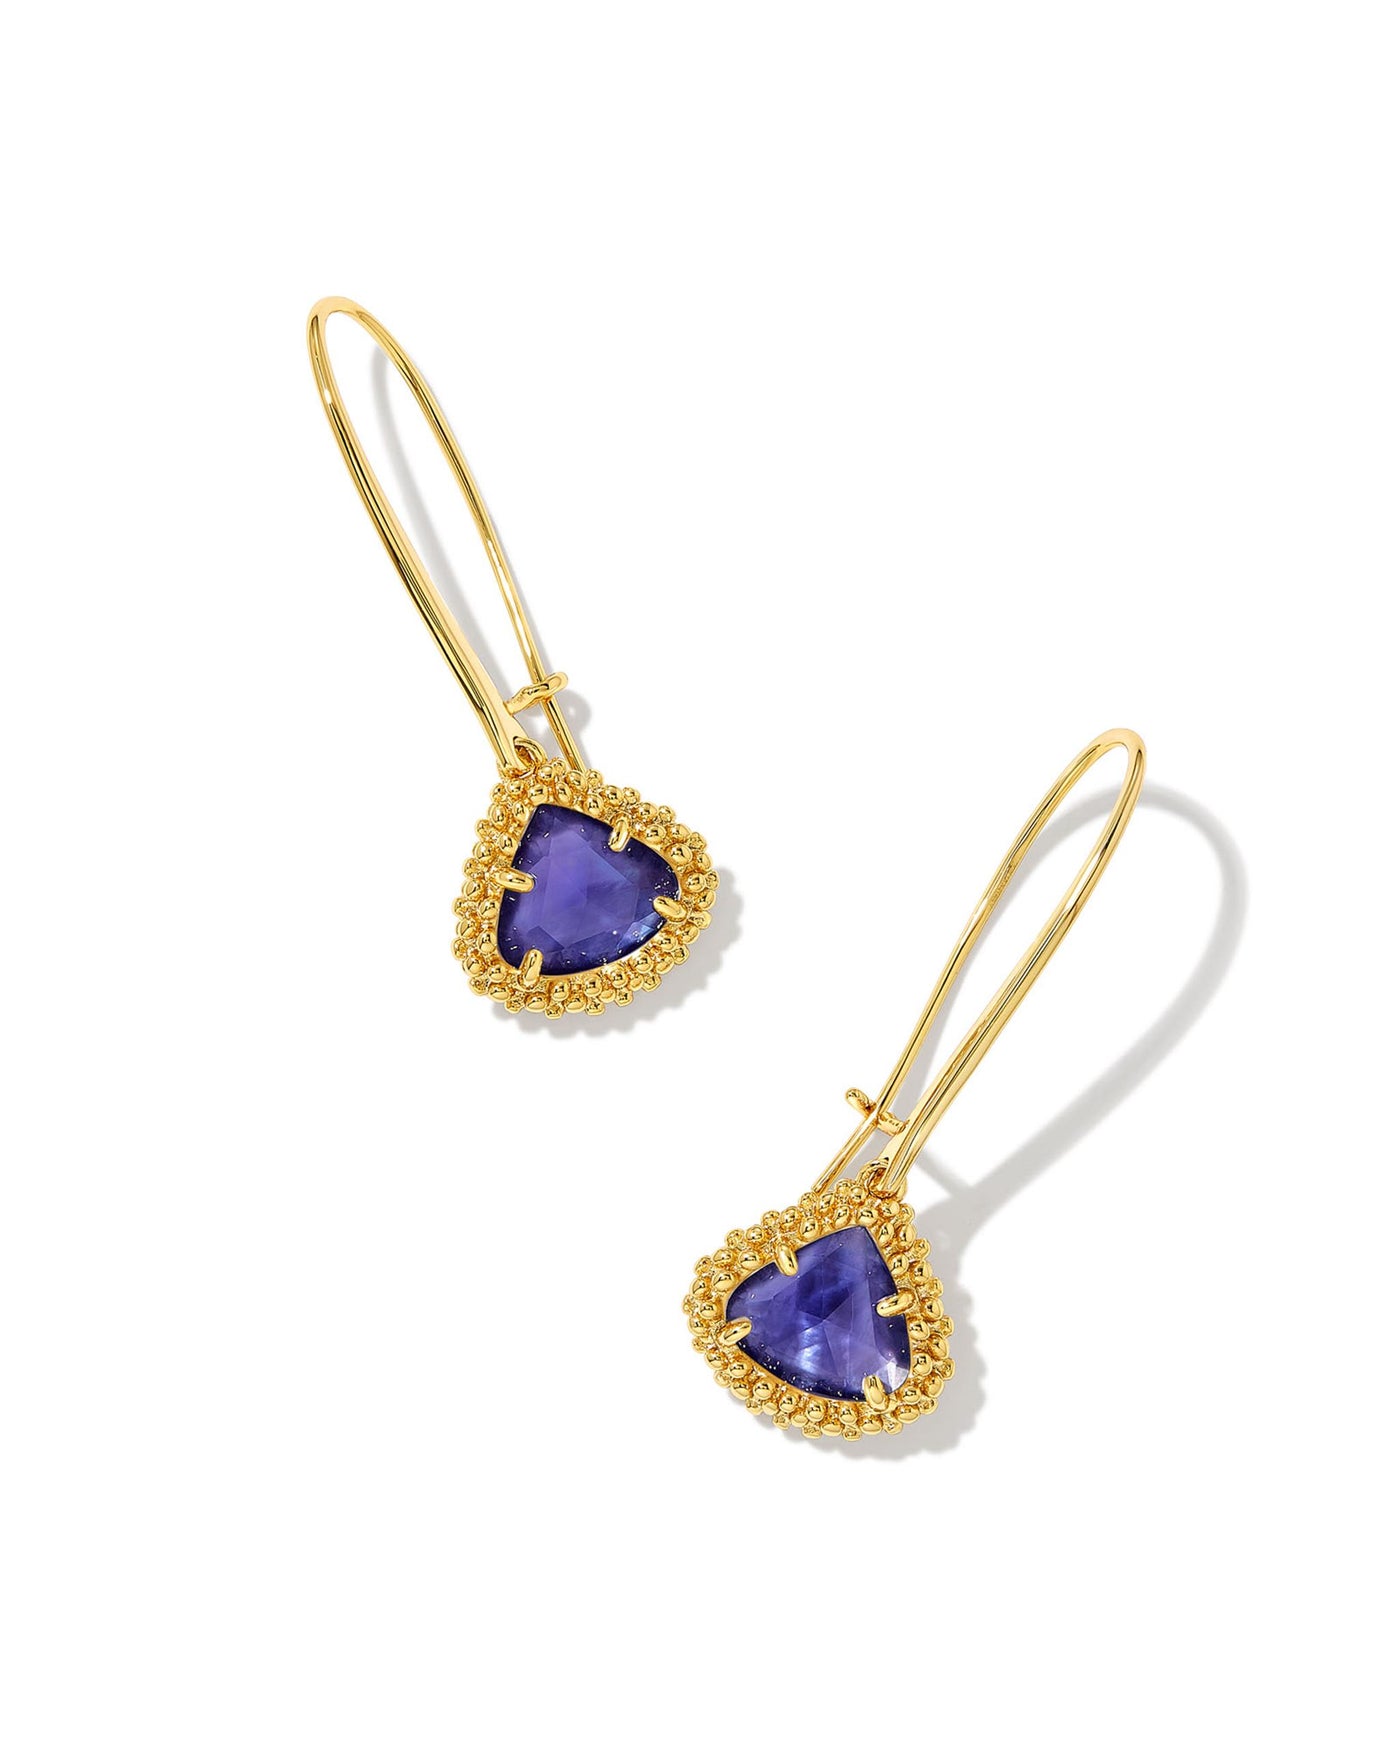 Gold Tone Earrings Featuring DarkLavender Illusion by Kendra Scott